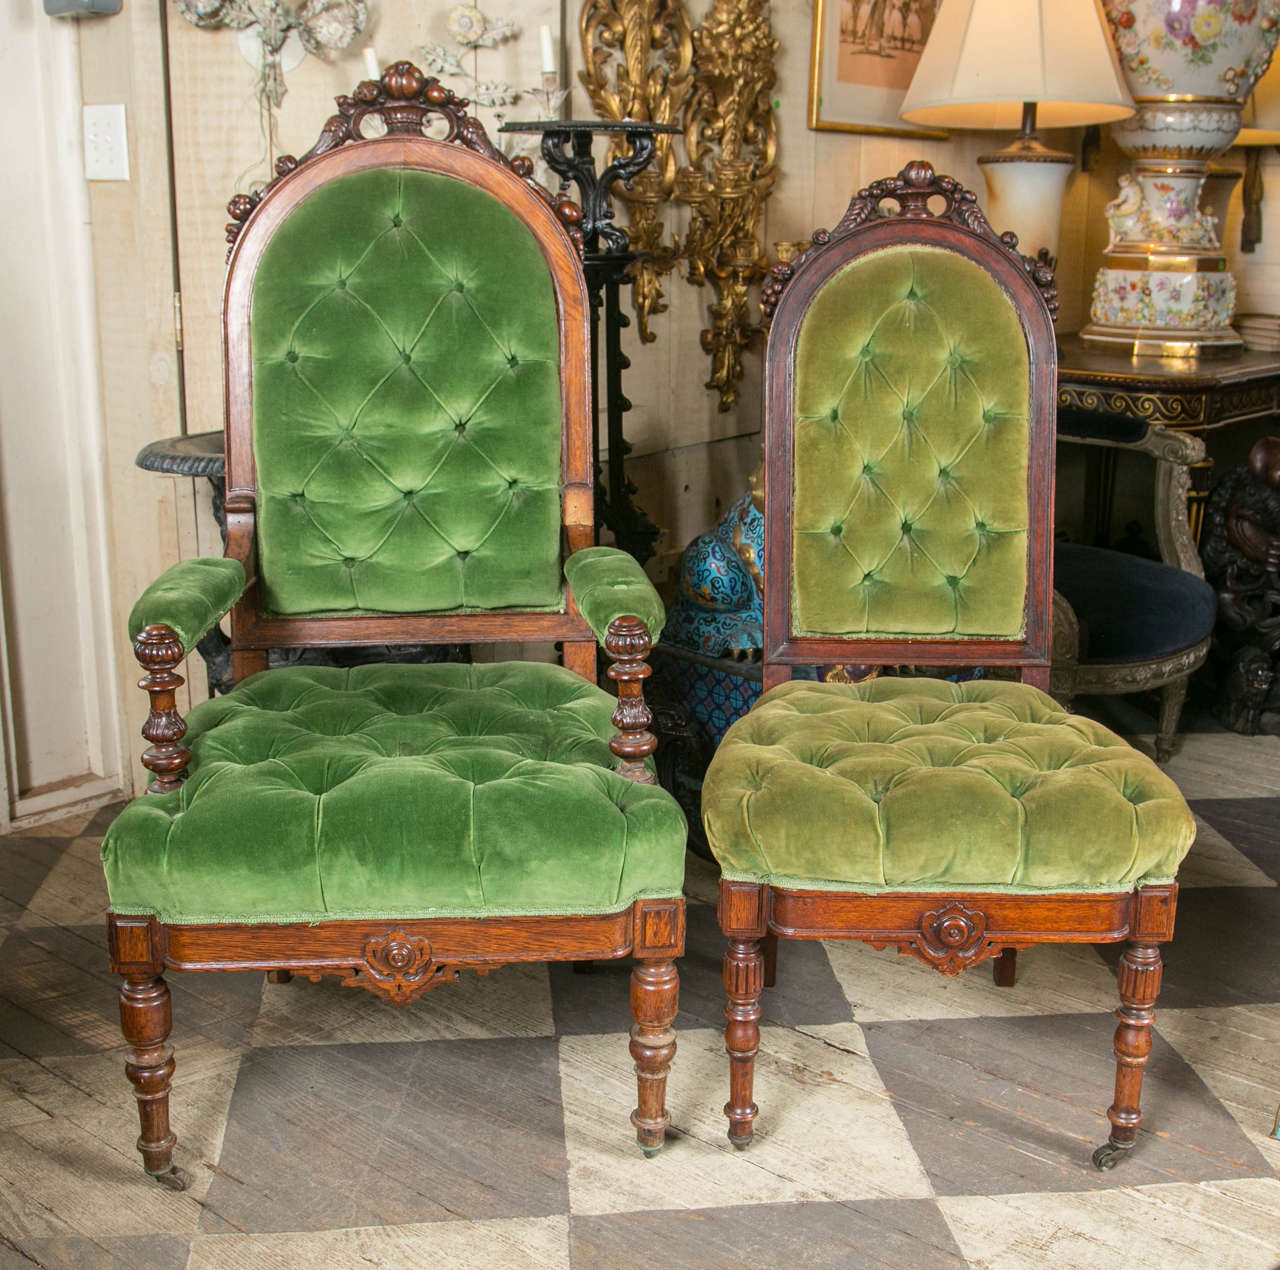 This set comprises two armchairs and six side chairs. The oak frames are hand-carved and decorated with nuts and fruits. The turned front legs have casters.
The side chairs are smaller in proportion to the arm chairs. The dimensions given are of the